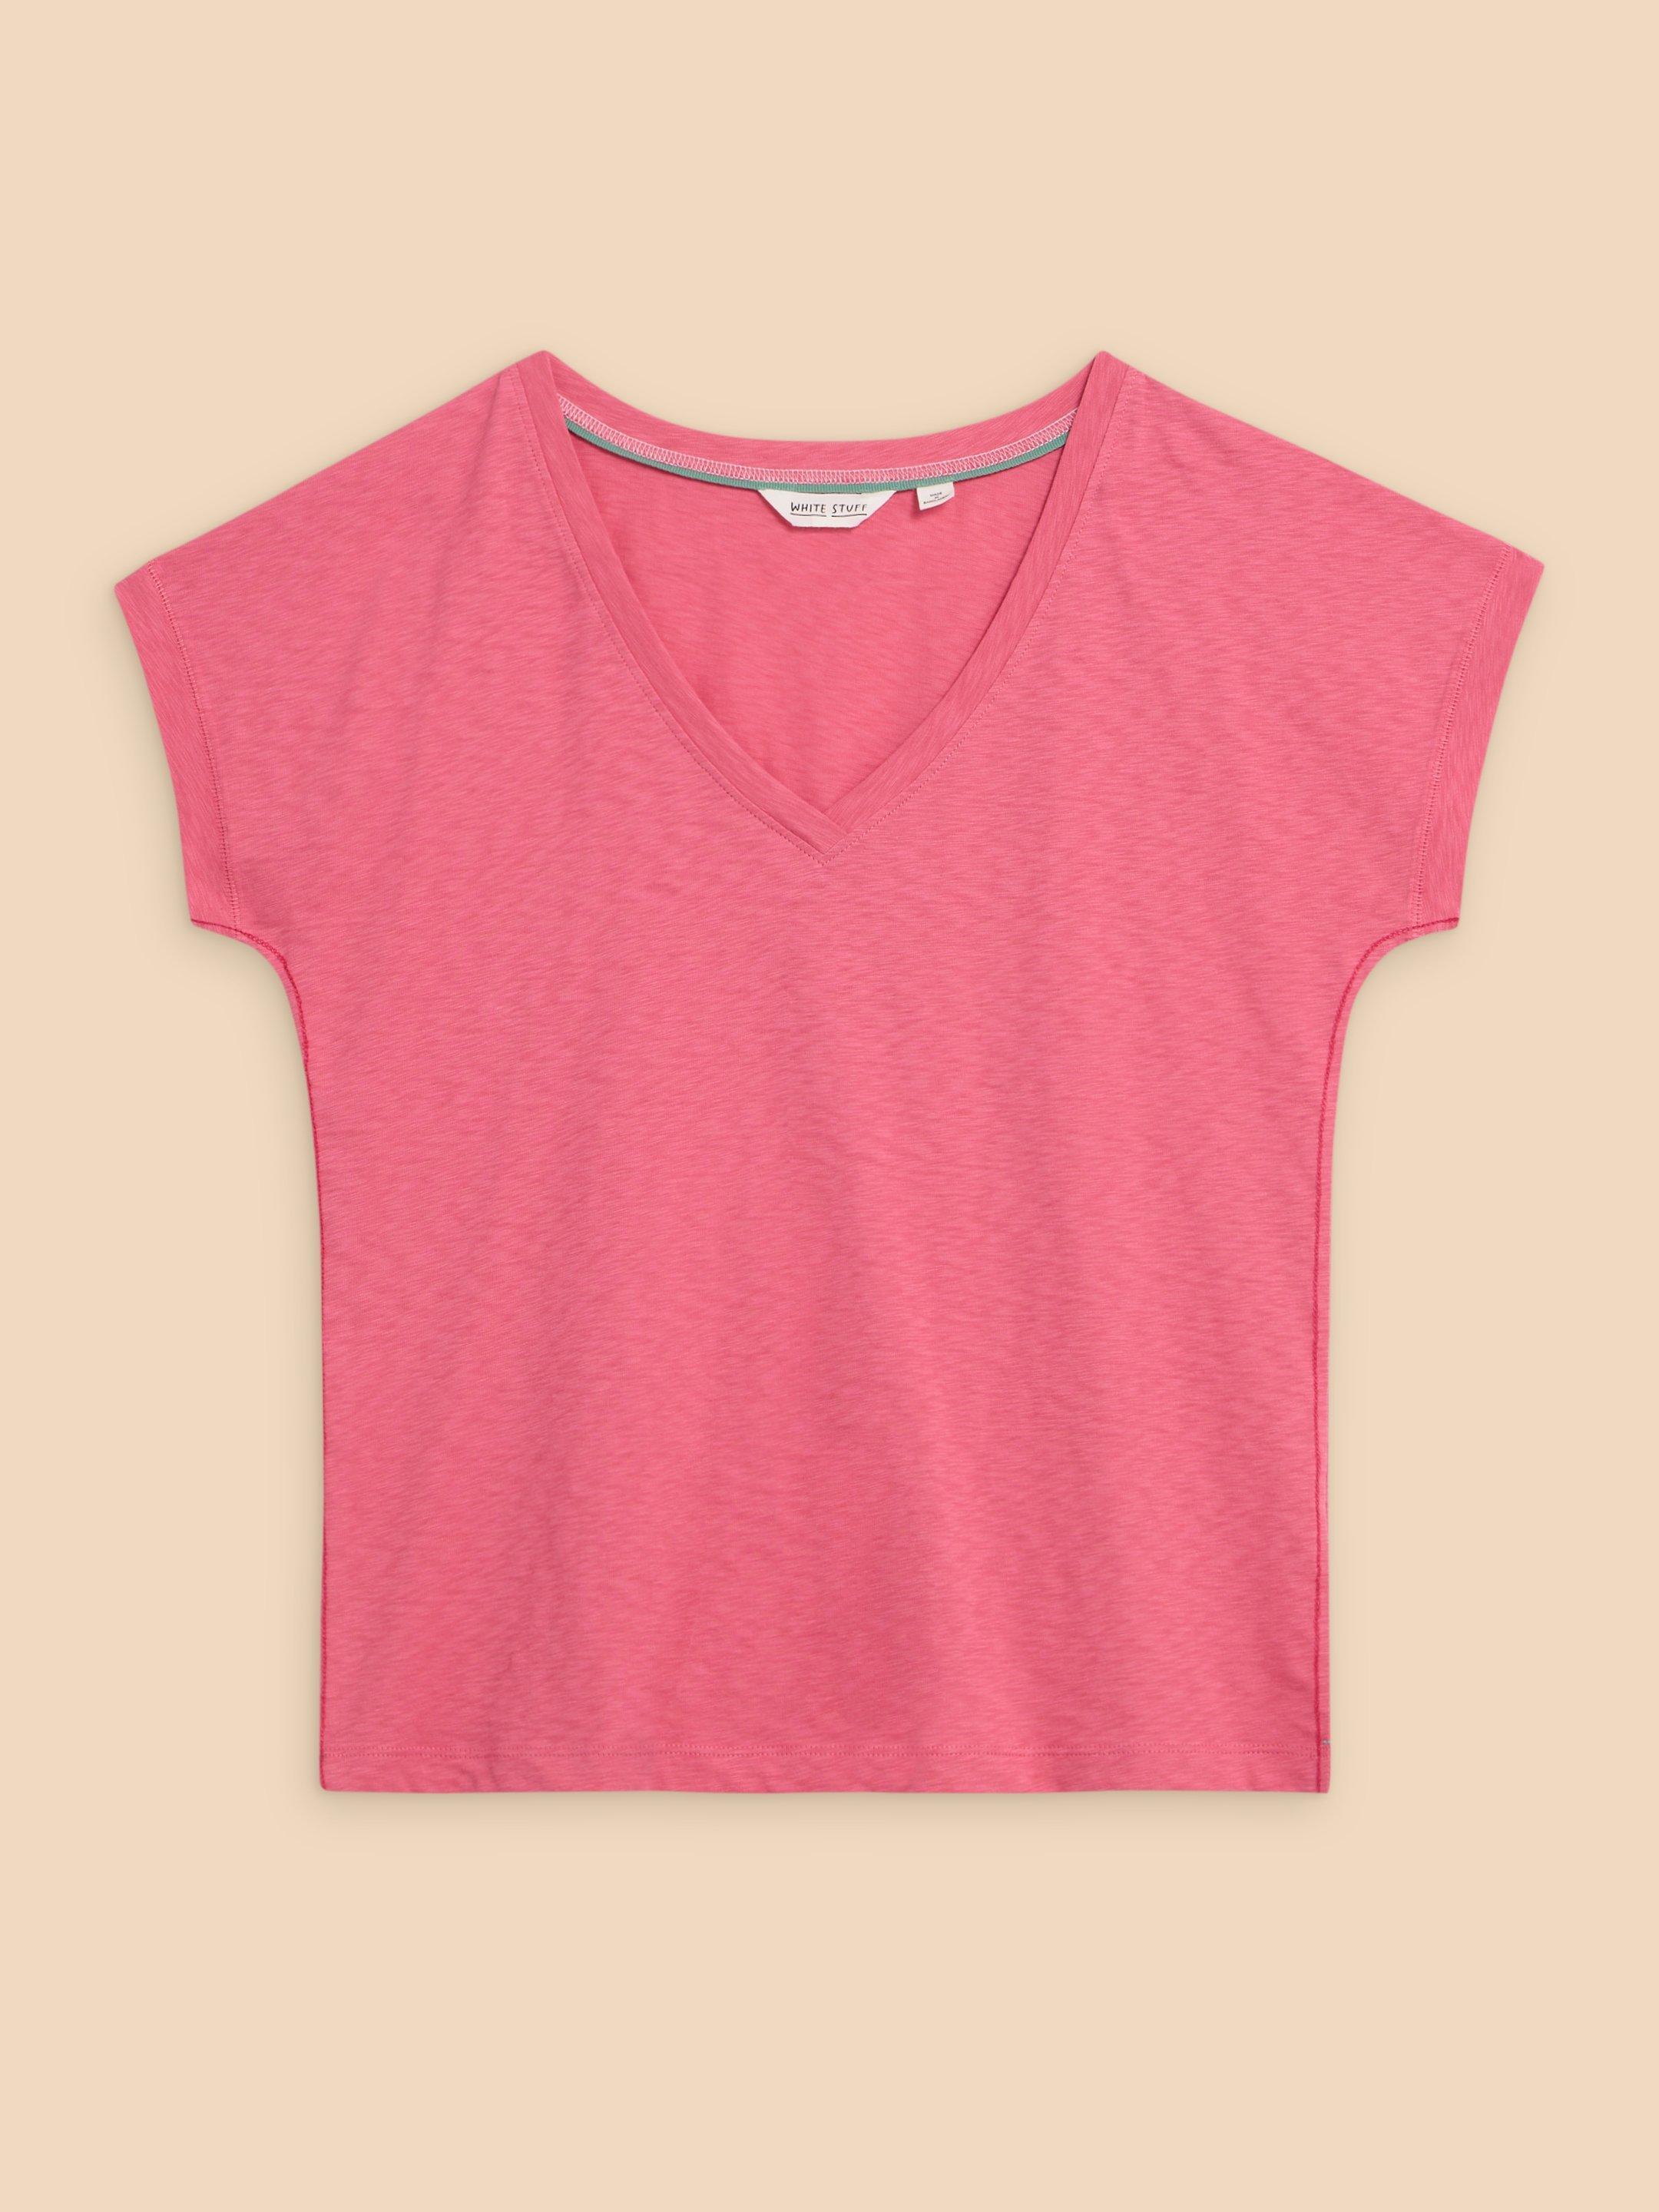 NOAH SS V NECK TEE in LGT PINK - FLAT FRONT